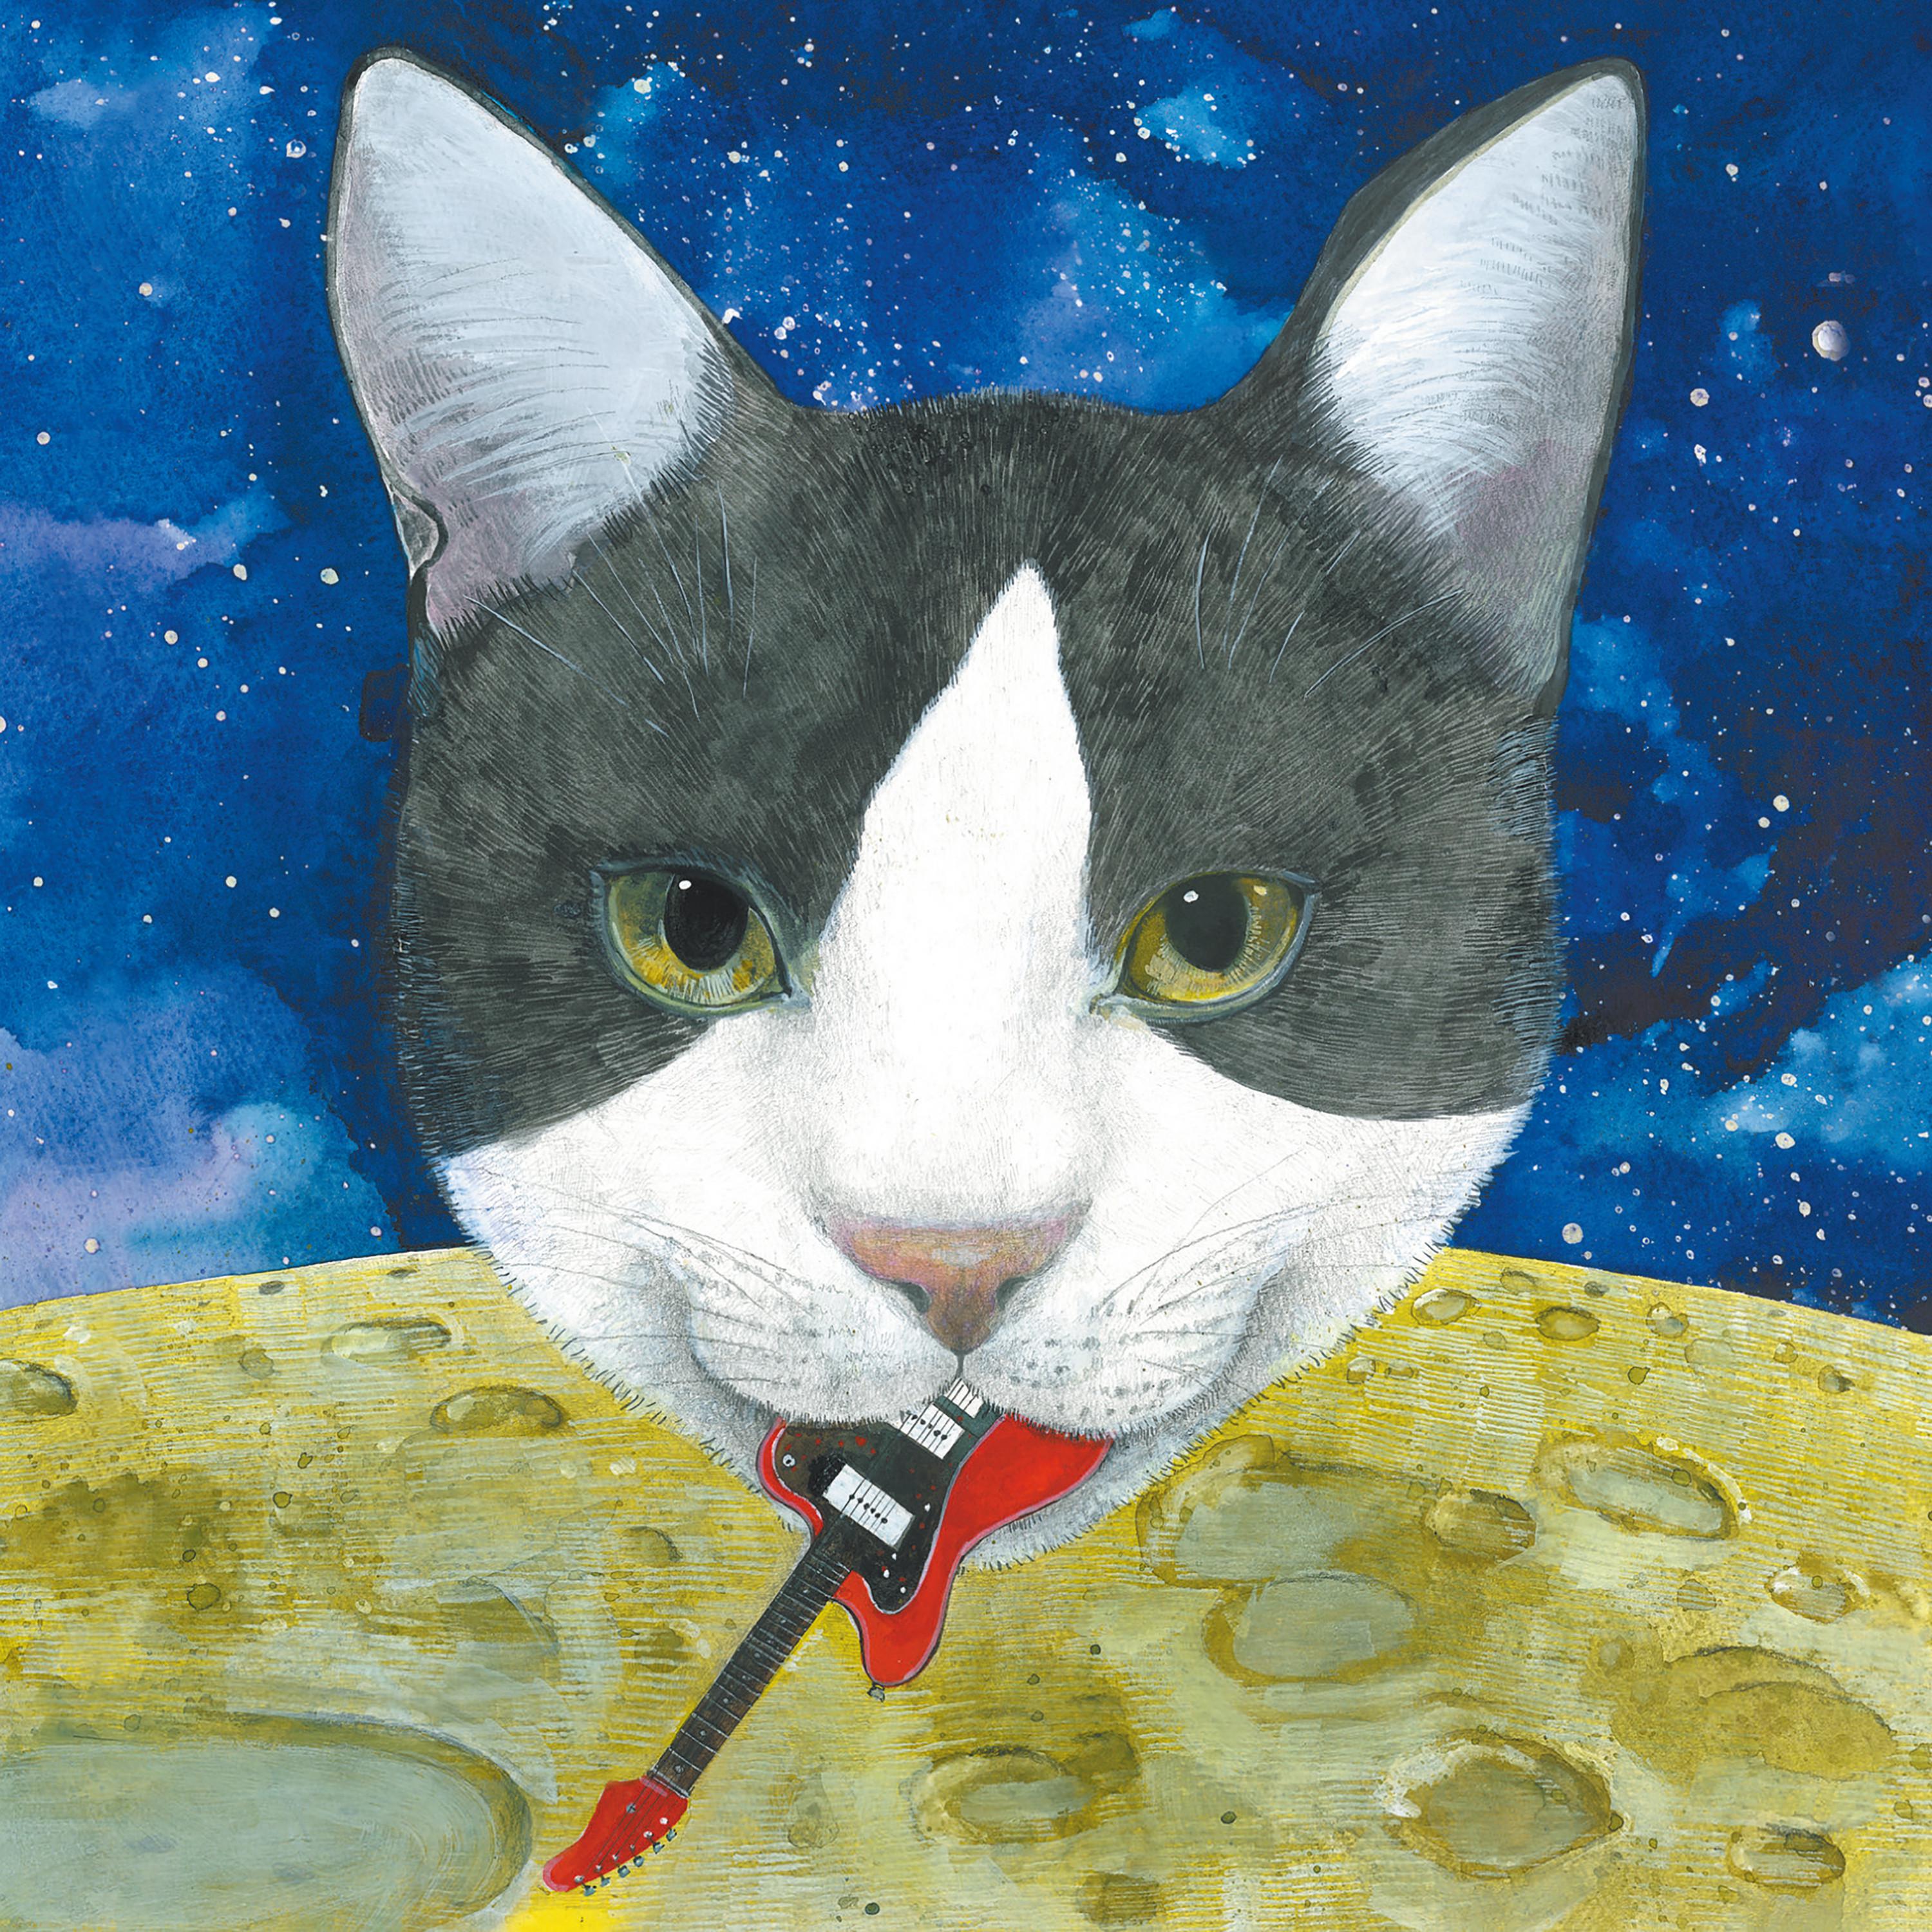 General 3000x3000 album covers artwork Moon cats animals guitar musical instrument looking at viewer stars whiskers digital art